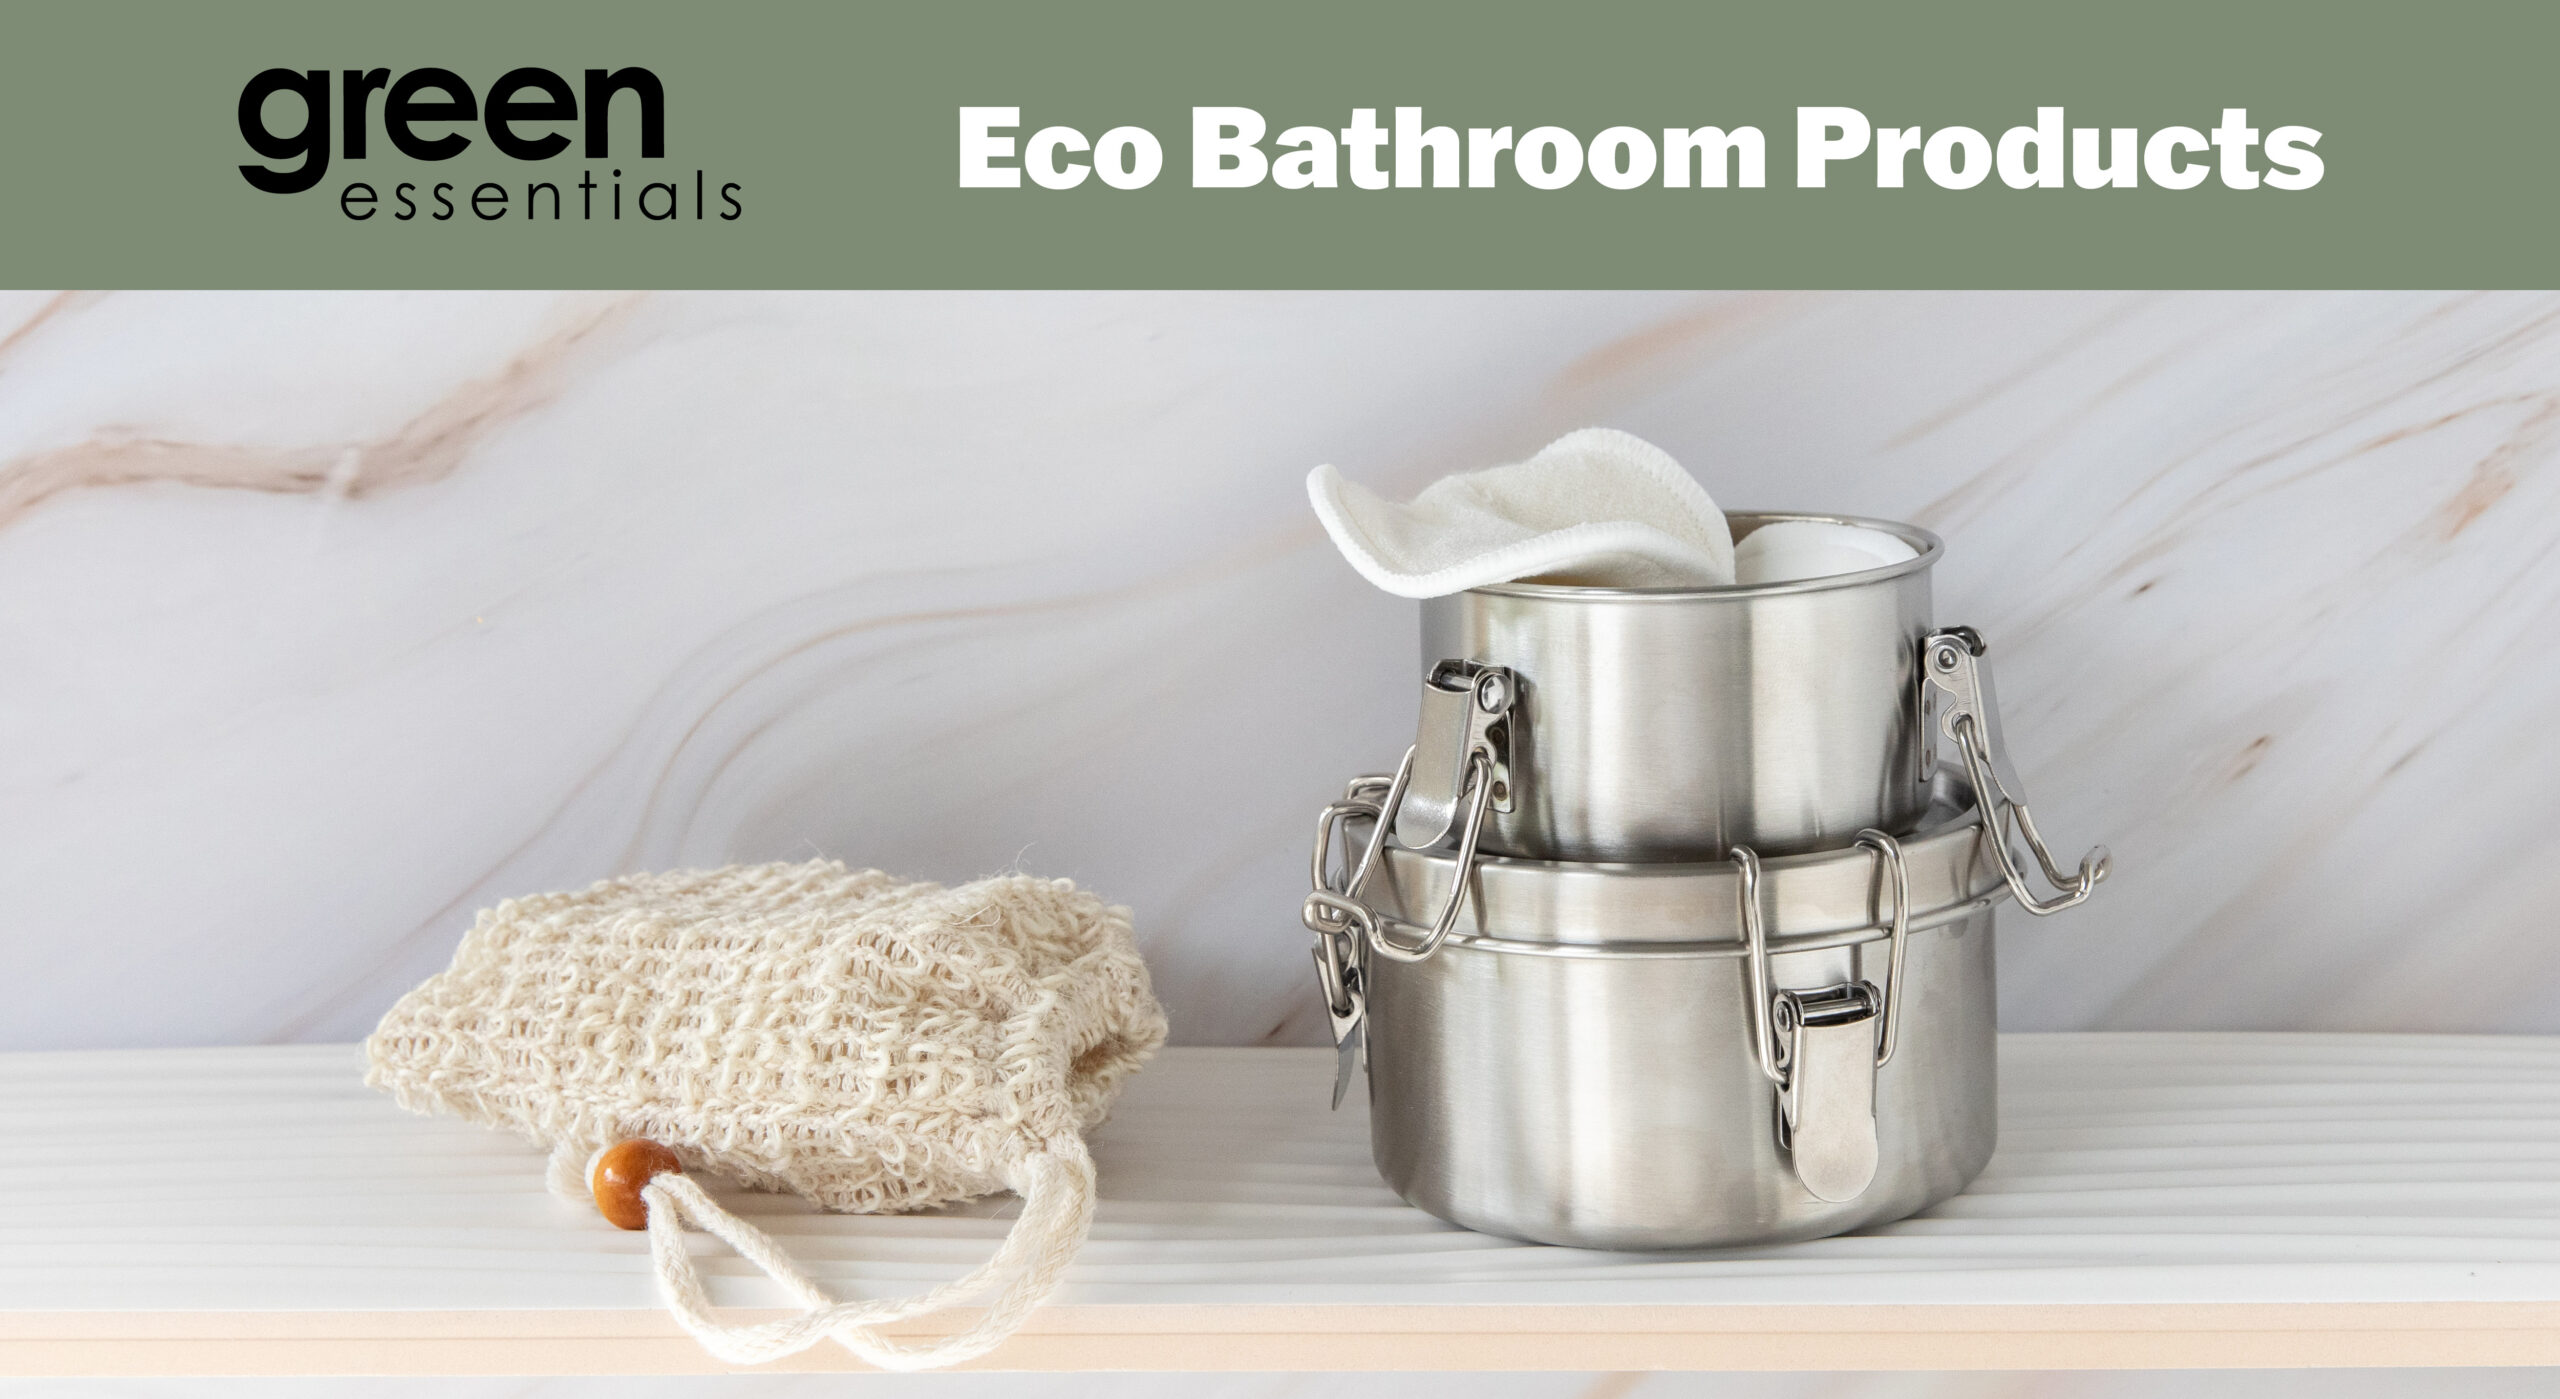 Eco Bathroom Products by Green Essentials